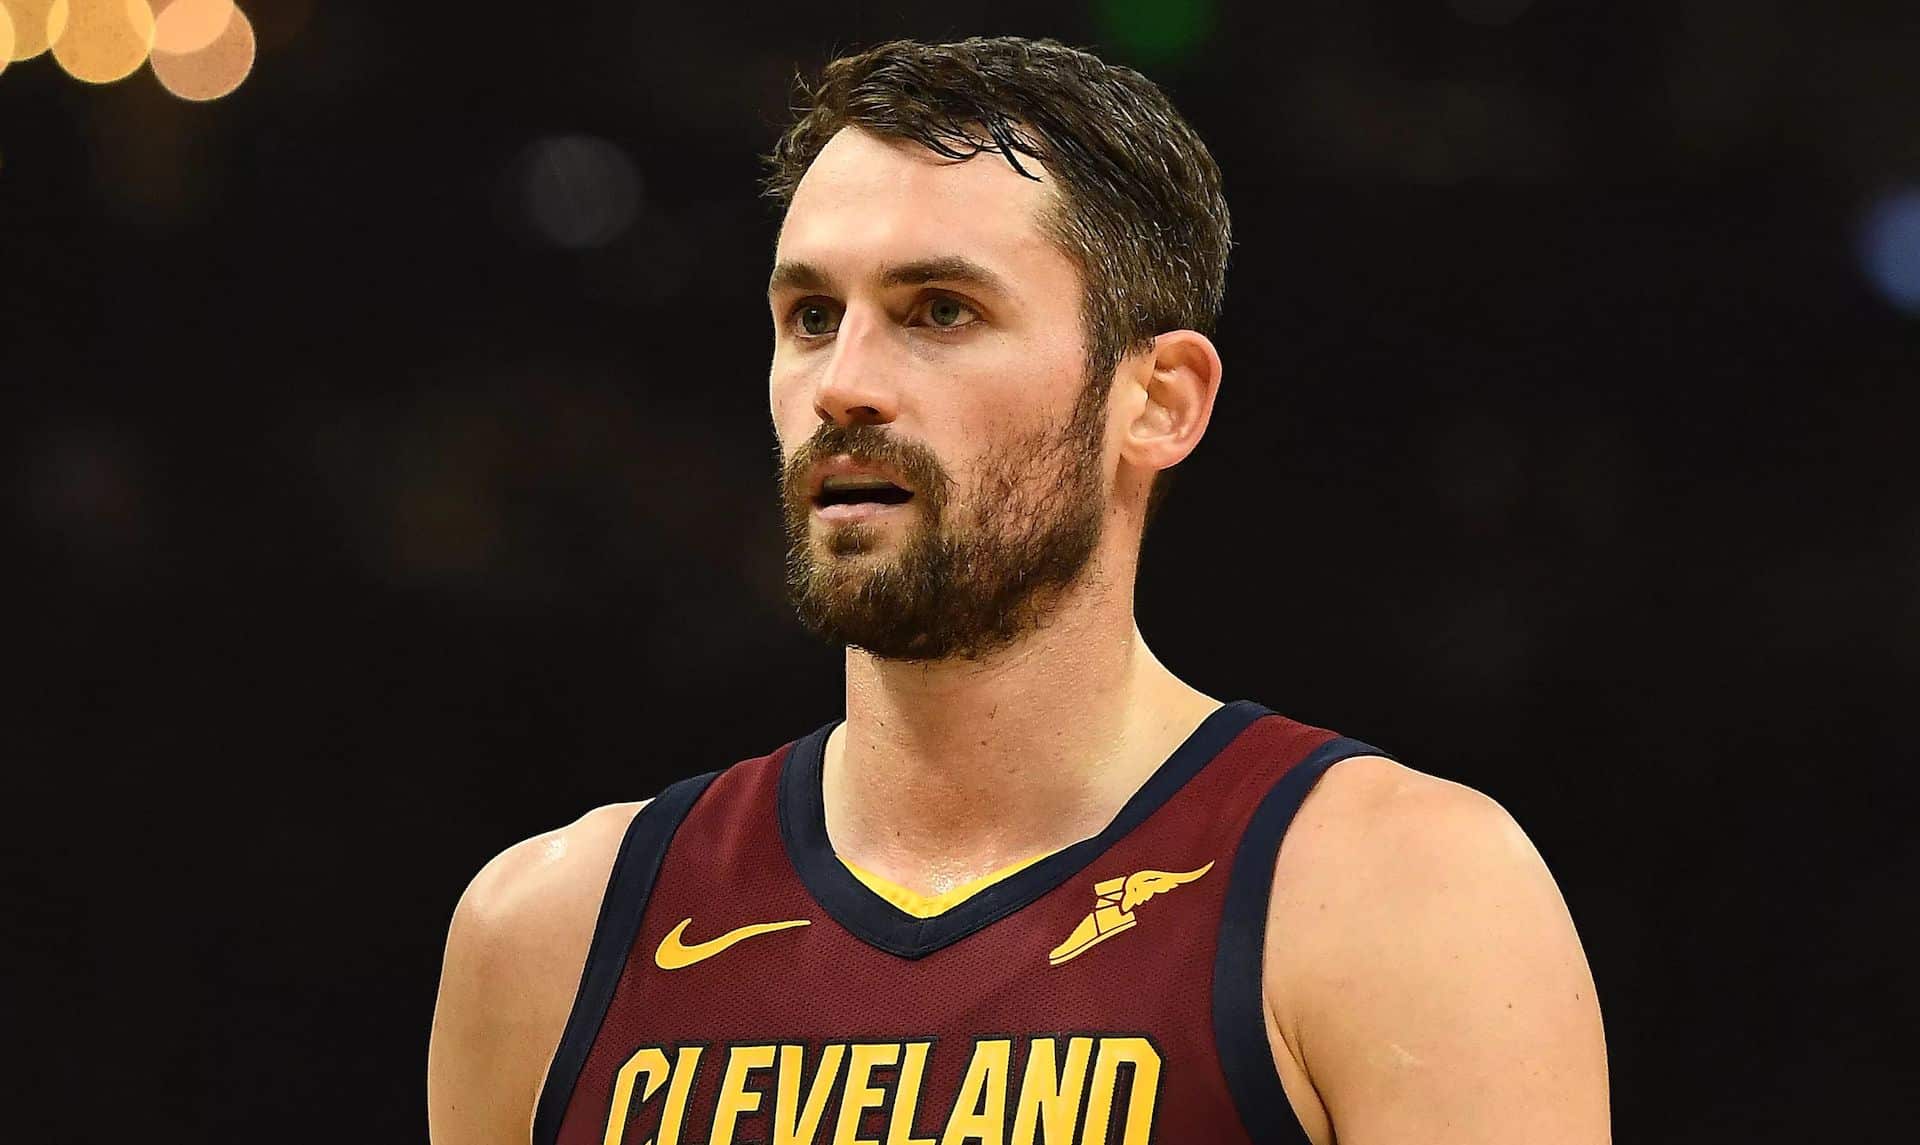 kevinlove Kevin Love is a professional basketball player. He is a five-time  All-Star, a two-time member of the All-NBA Second Team and…